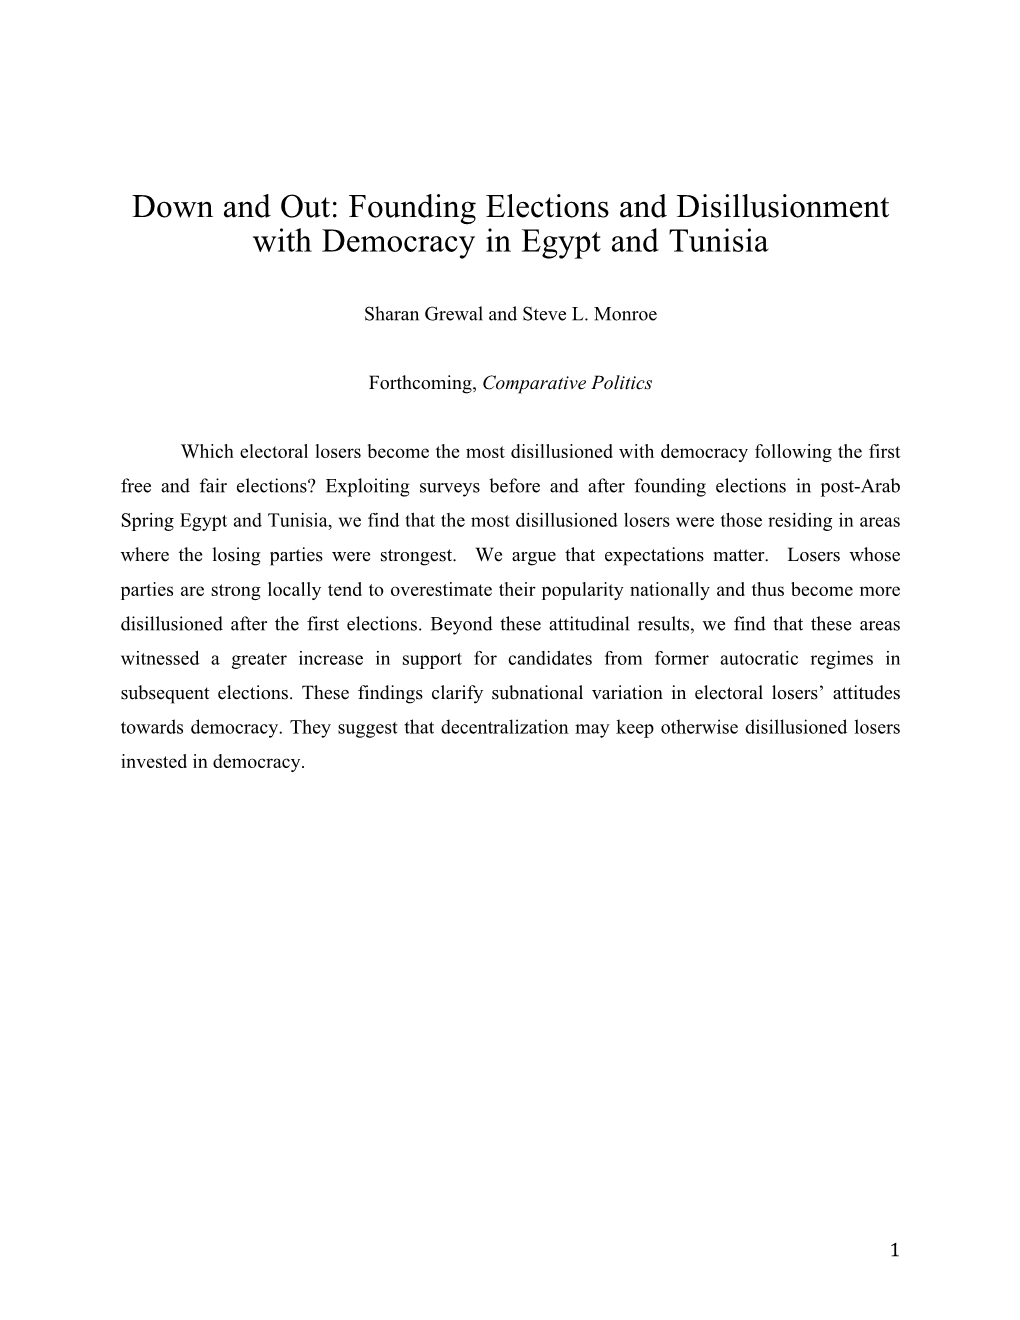 Down and Out: Founding Elections and Disillusionment with Democracy in Egypt and Tunisia